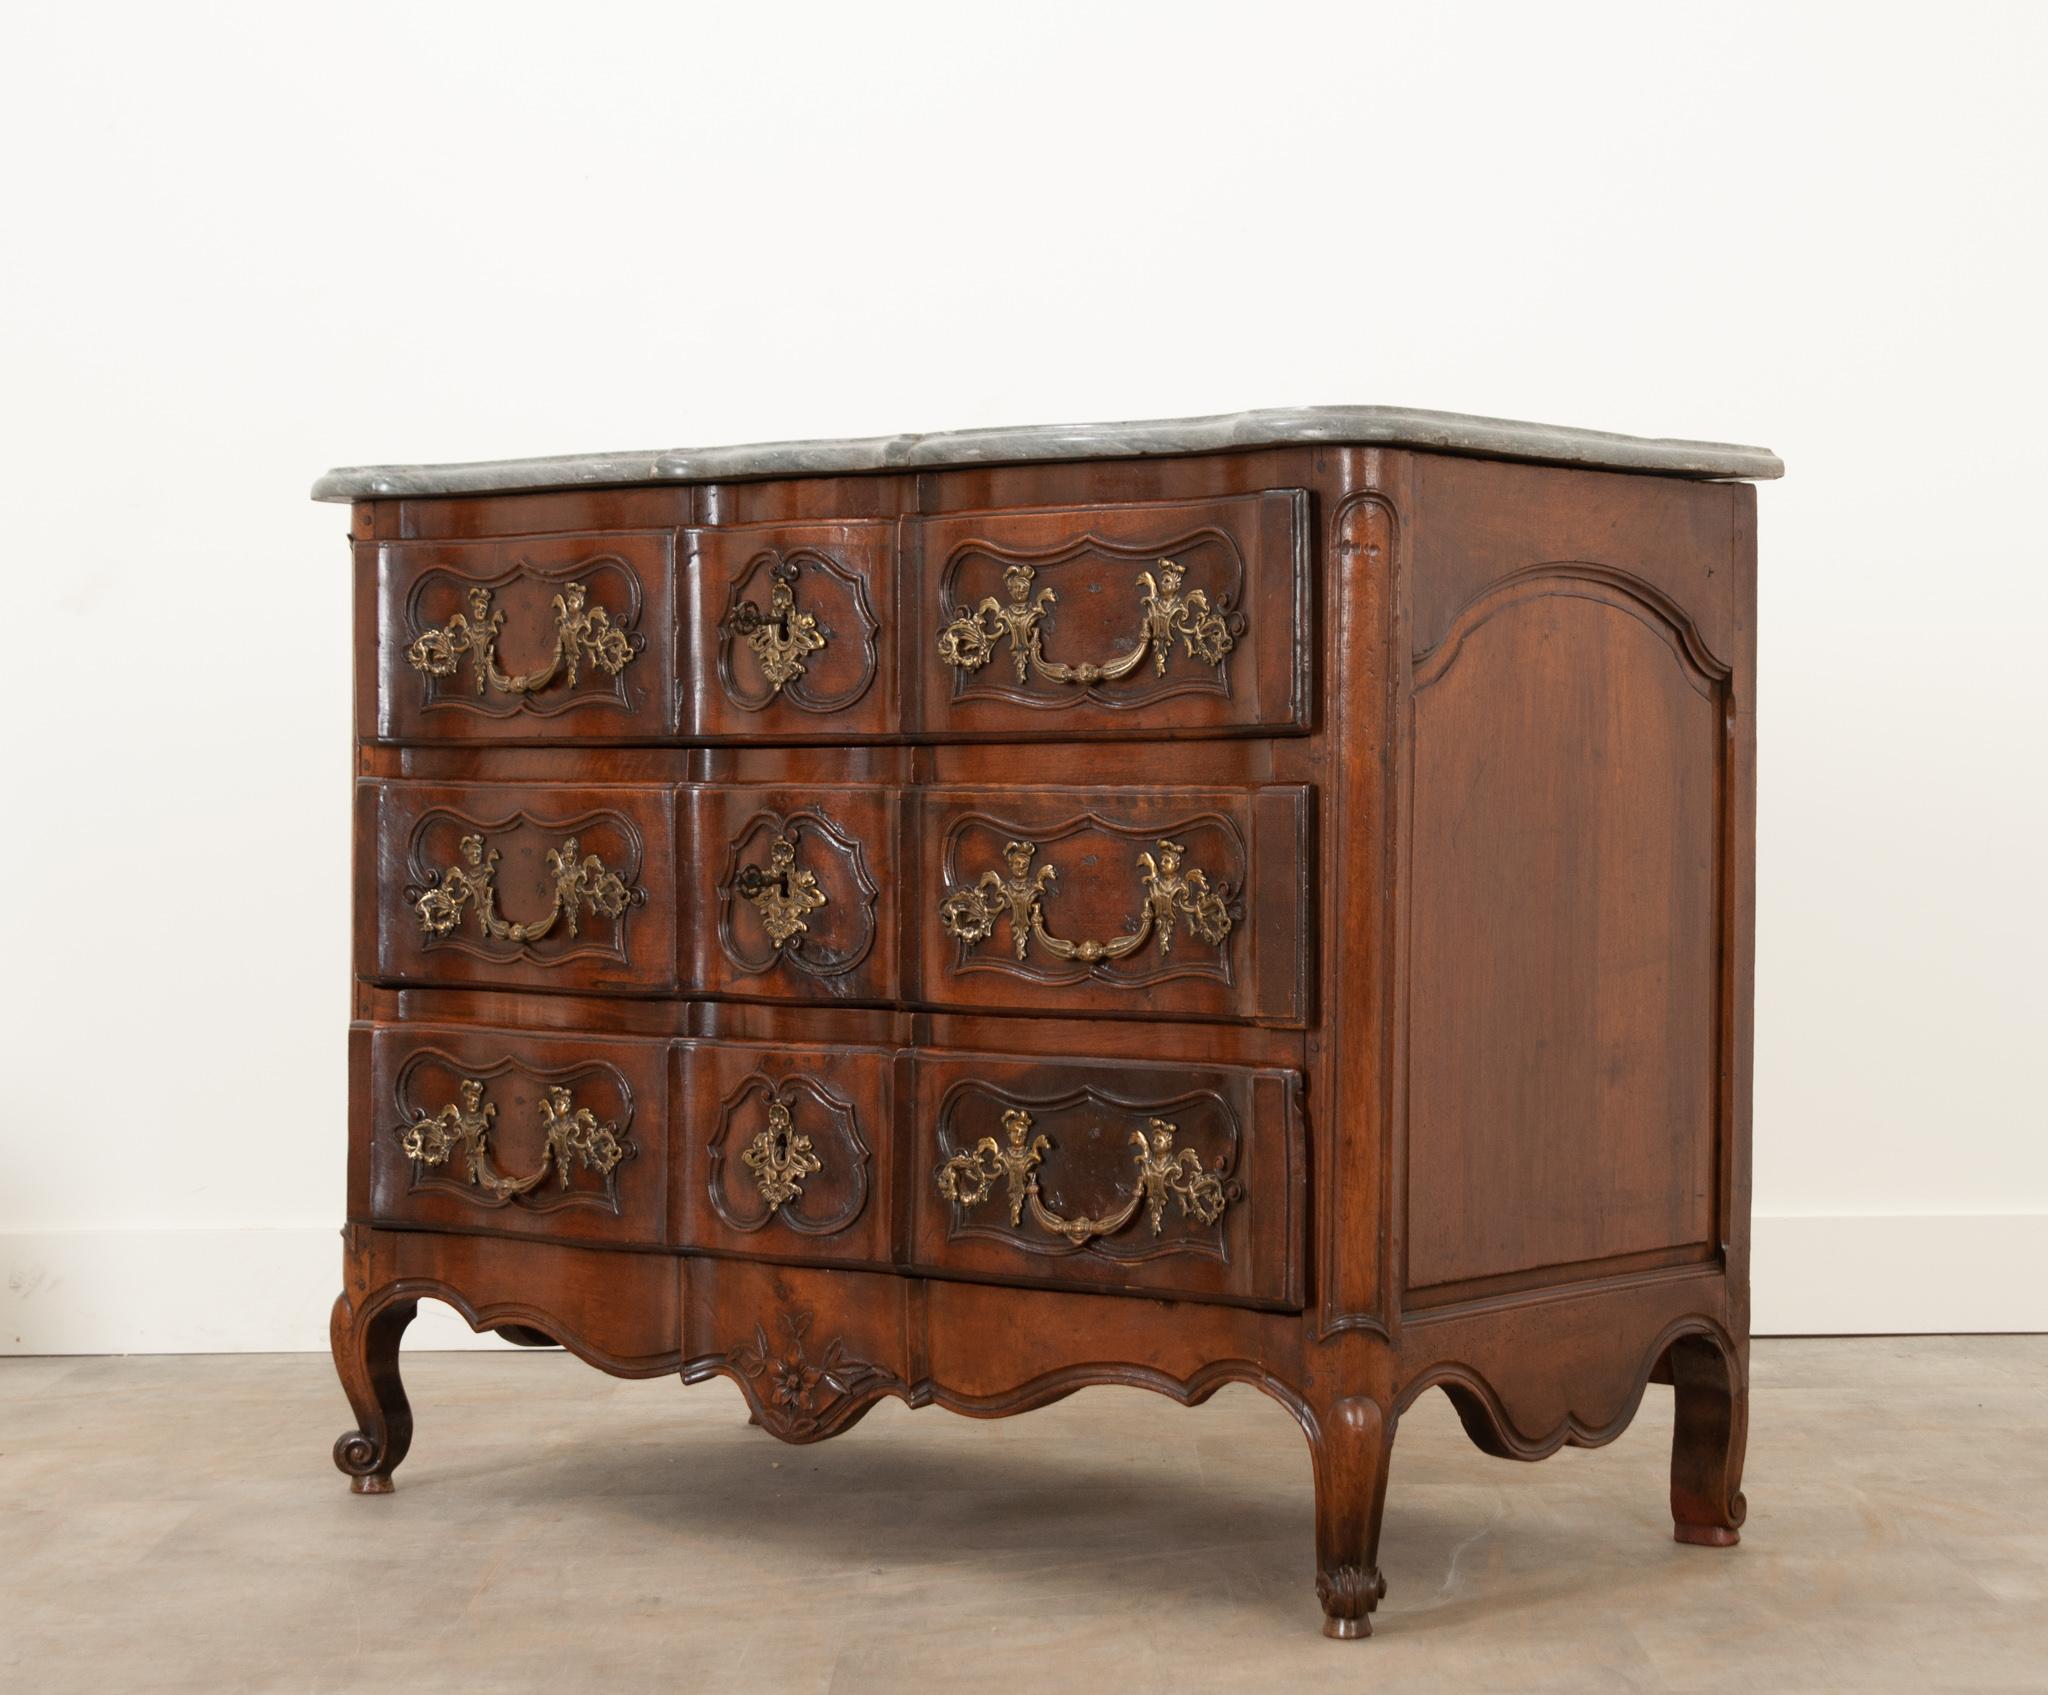 This handsome Louis XV style commode circa 1800 or earlier. A fantastic charcoal marble top with a molded edge, shaped in the same fashion as the body. A bank of three drawers features impressive cast brass ormolu pulls and escutcheons. Two keys are